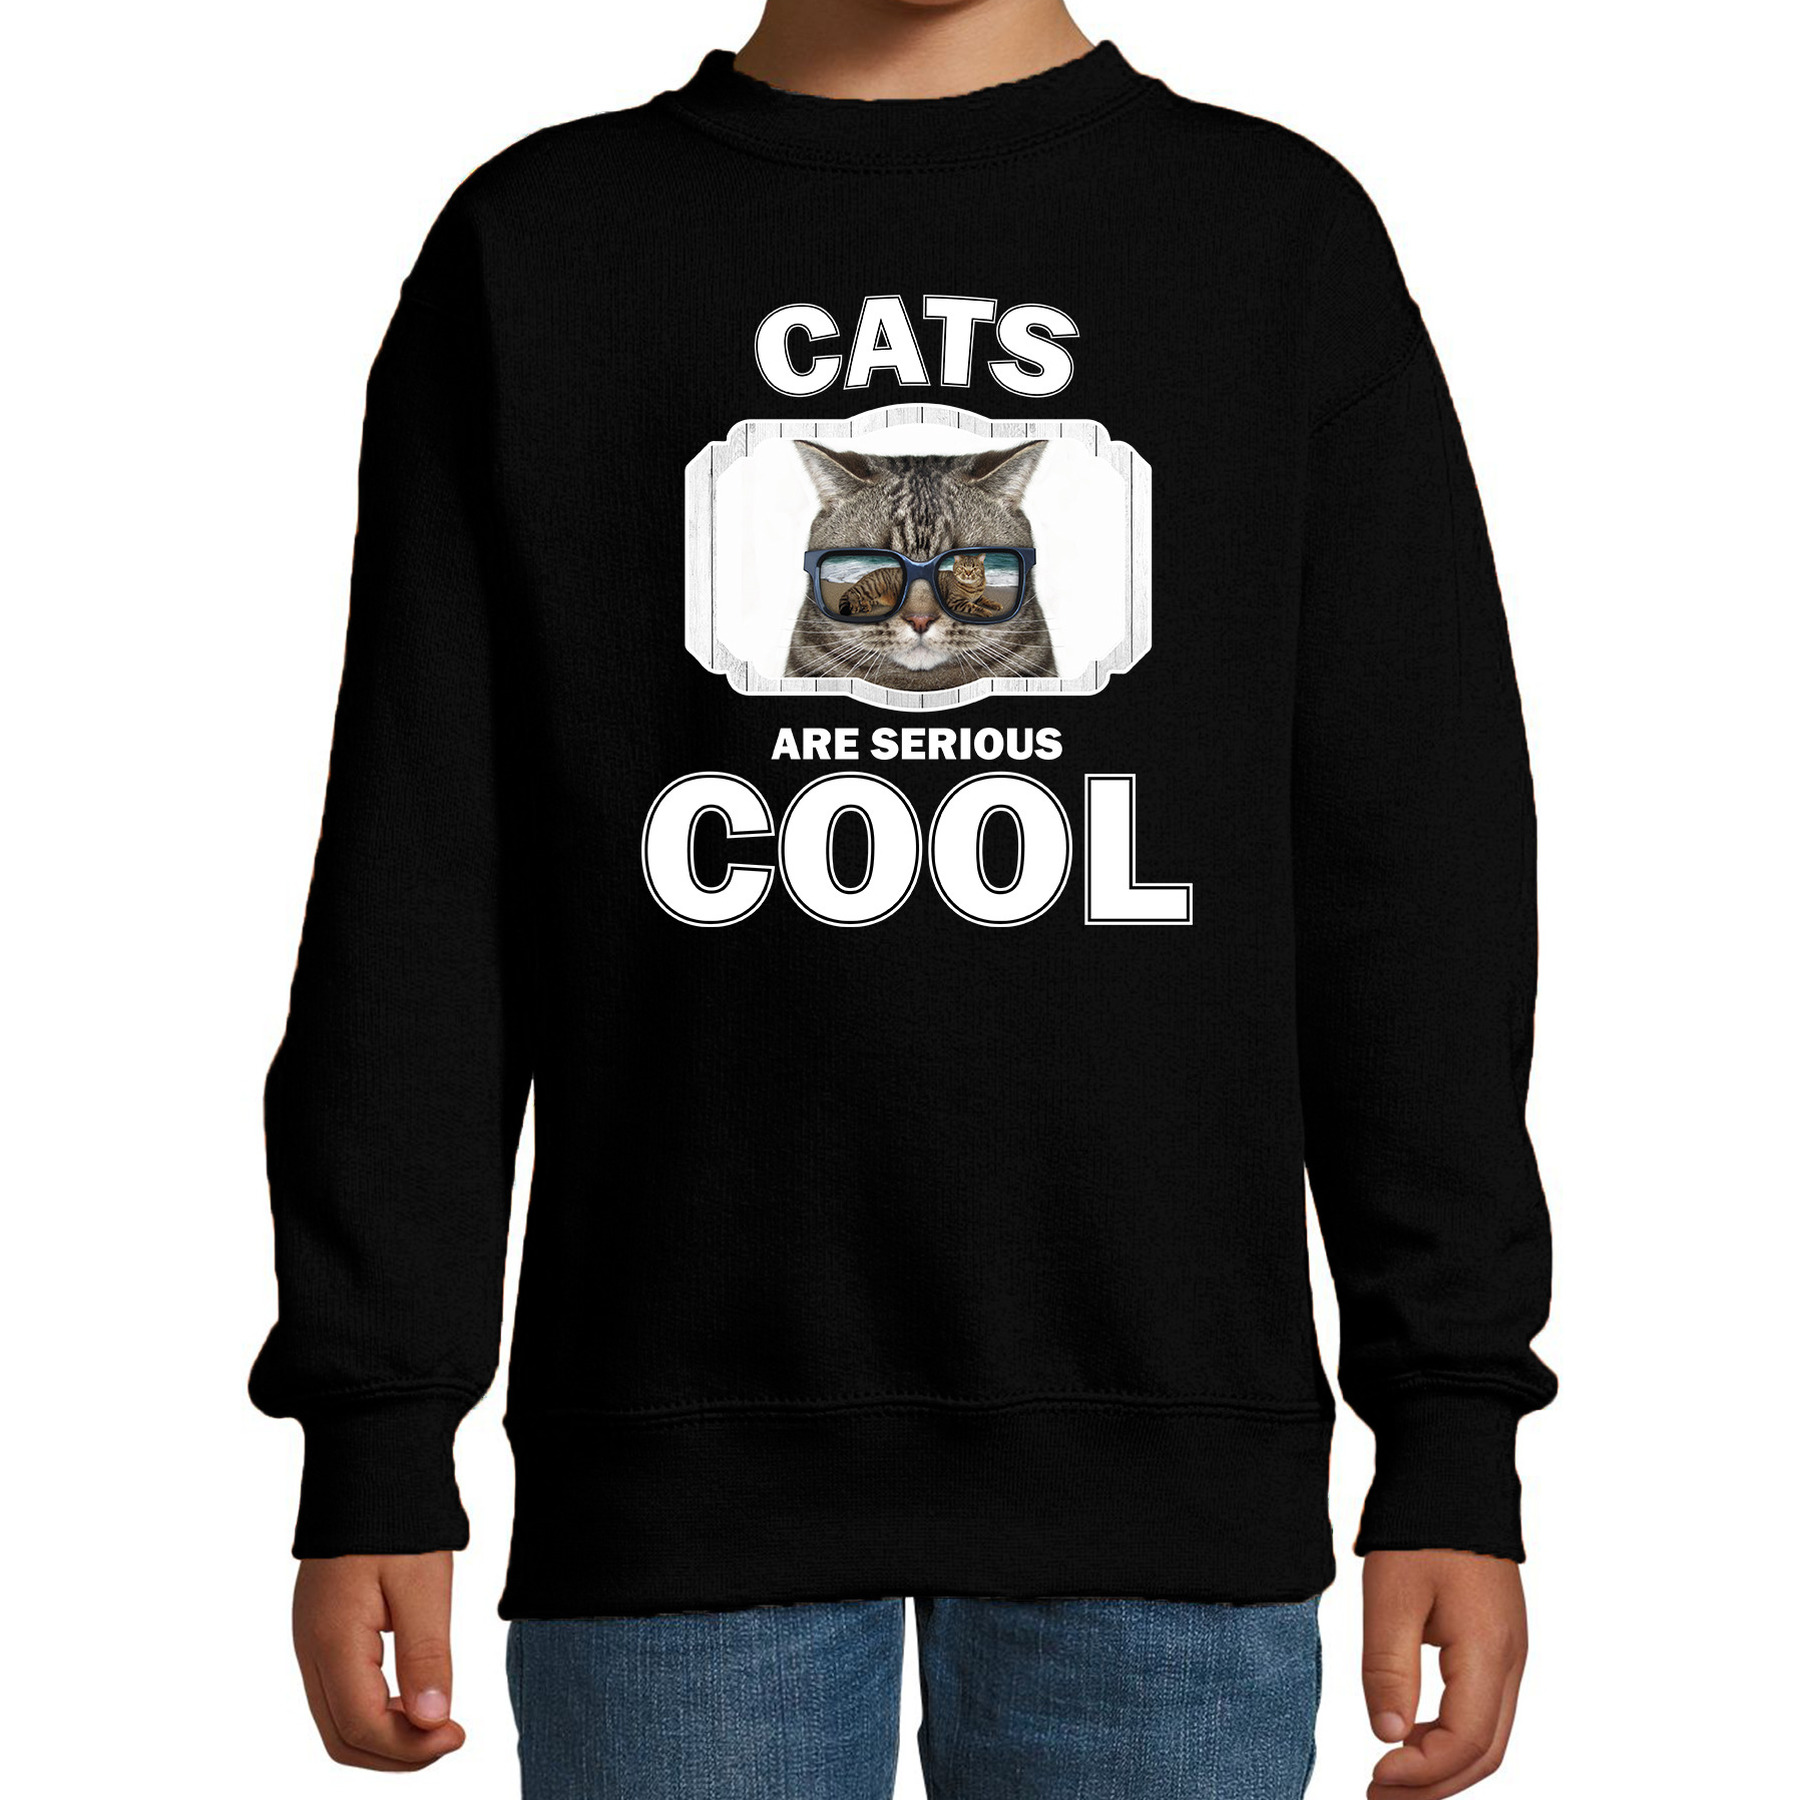 Sweater cats are serious cool zwart kinderen - katten/ coole poes trui